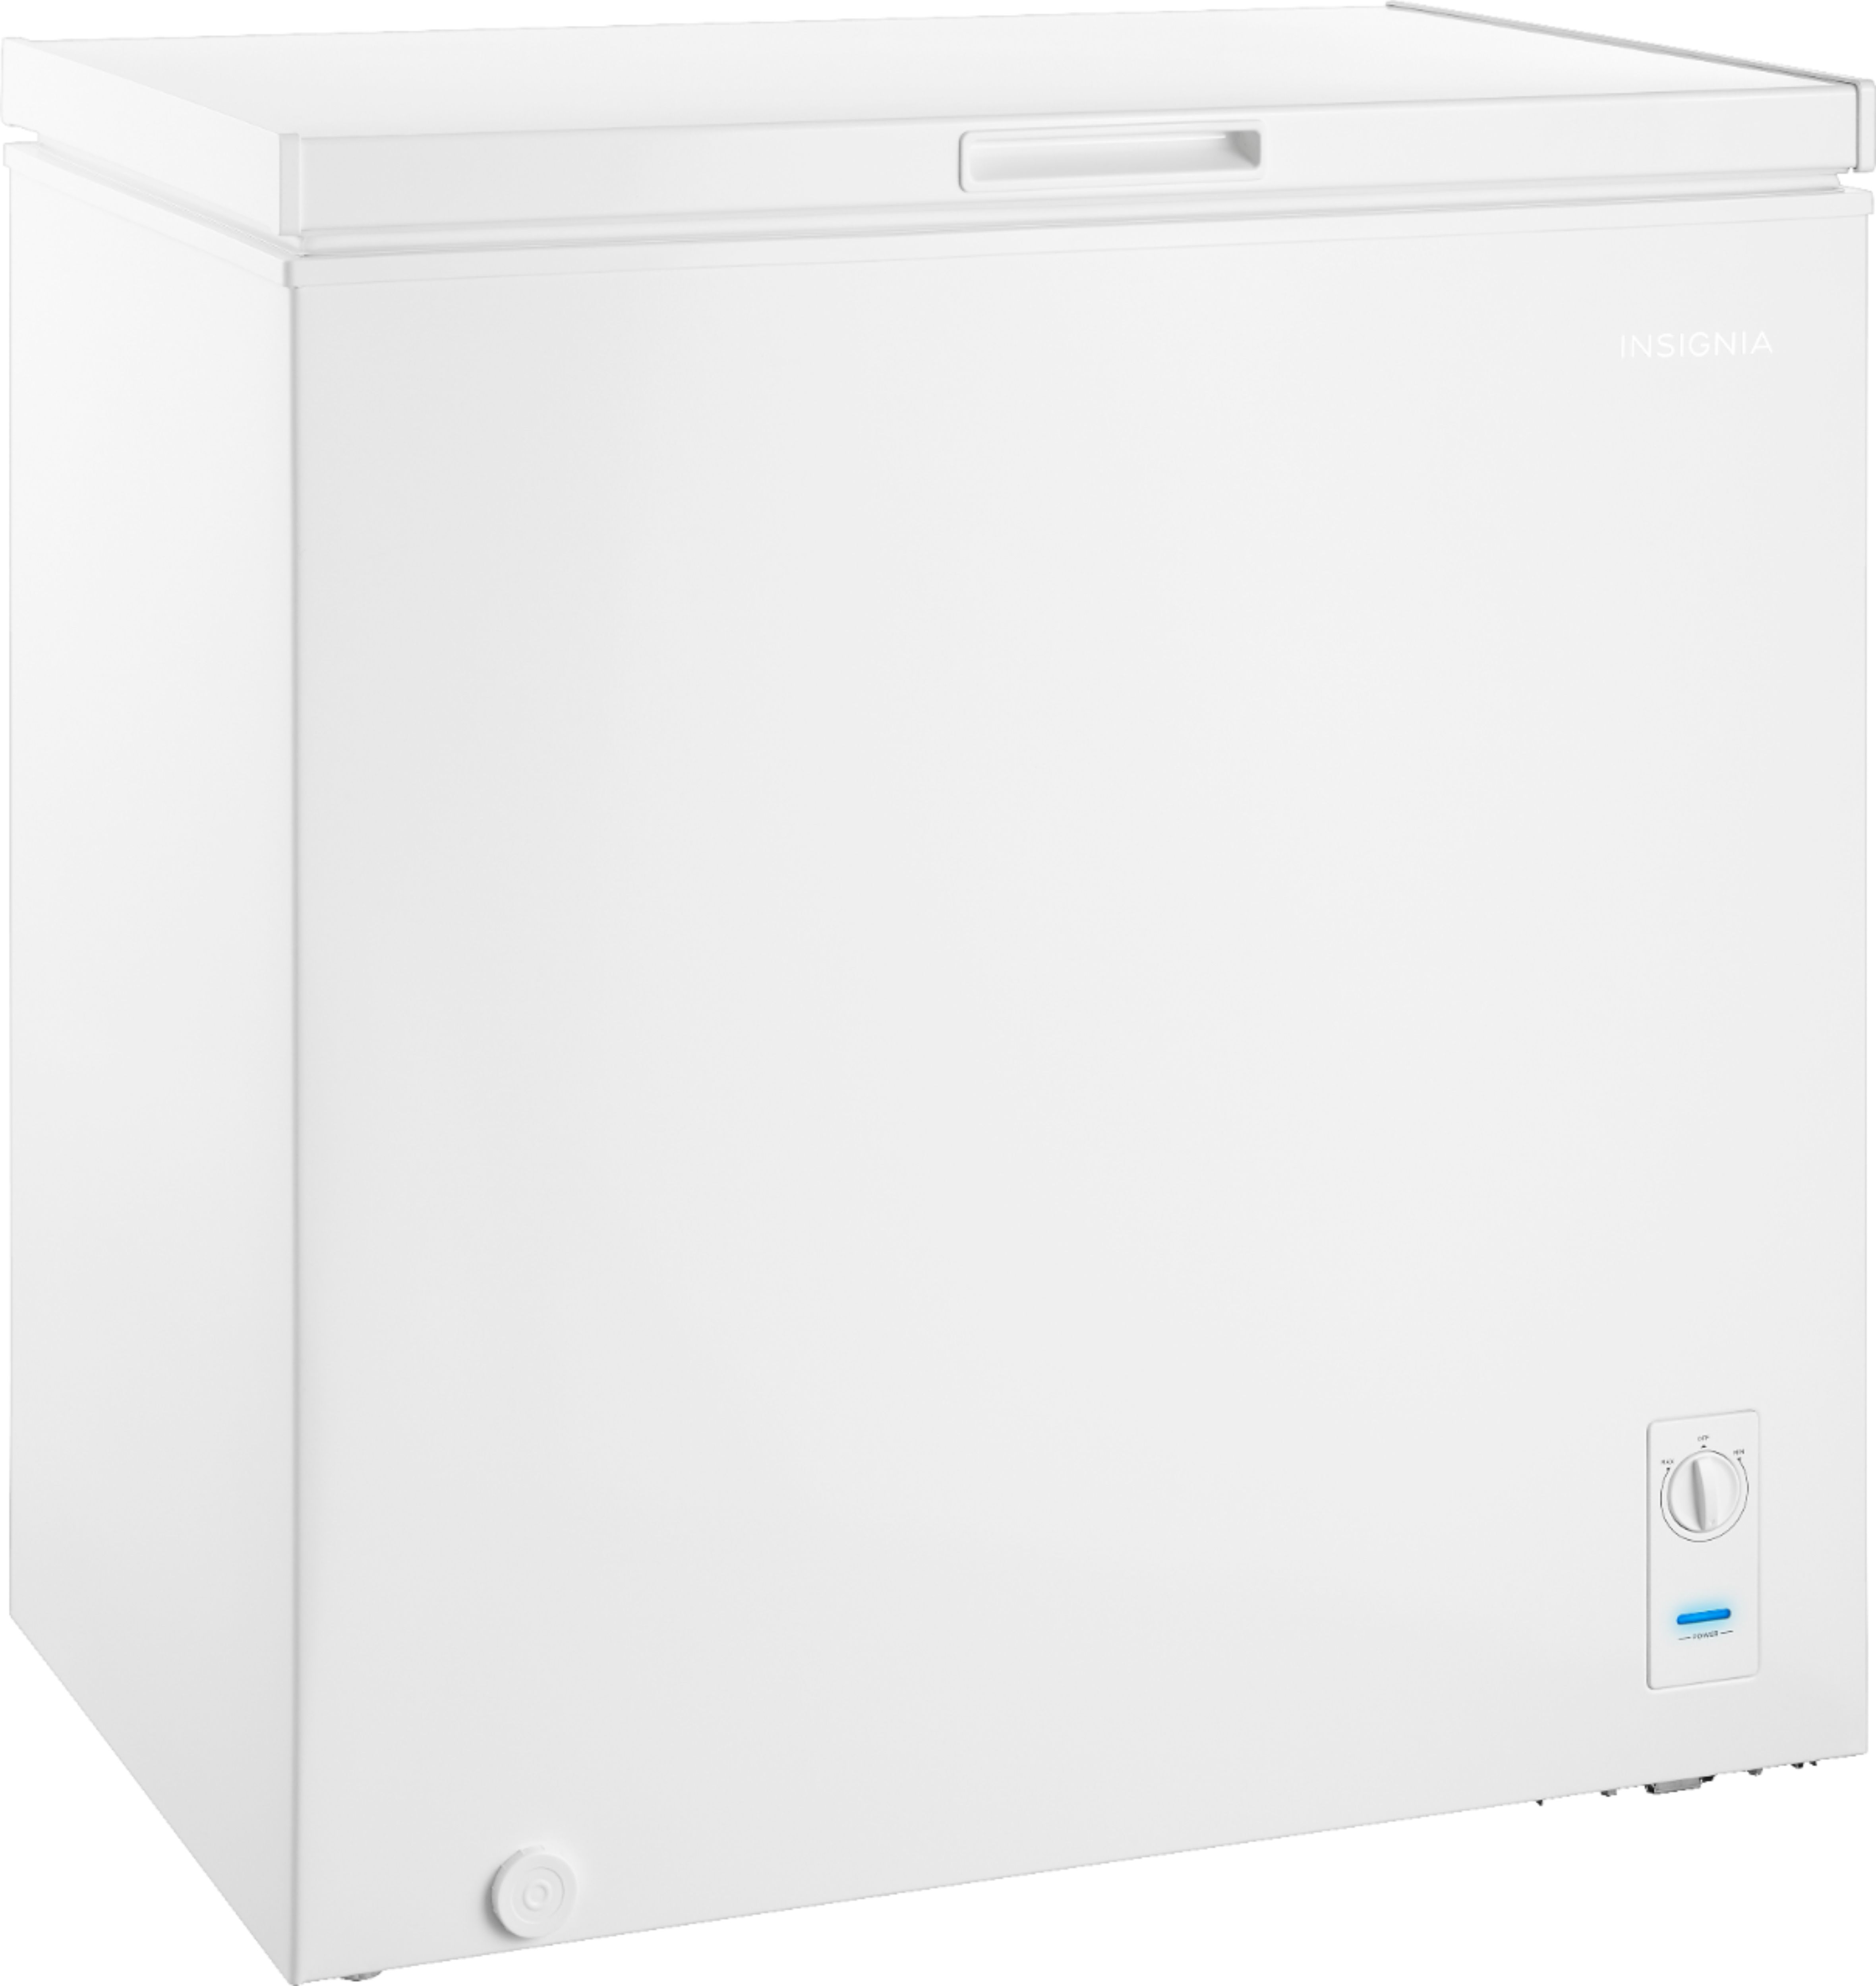 Angle View: Viking - Professional 5 Series Quiet Cool 19.2 Cu. Ft. Upright Freezer with Interior Light - Reduction red